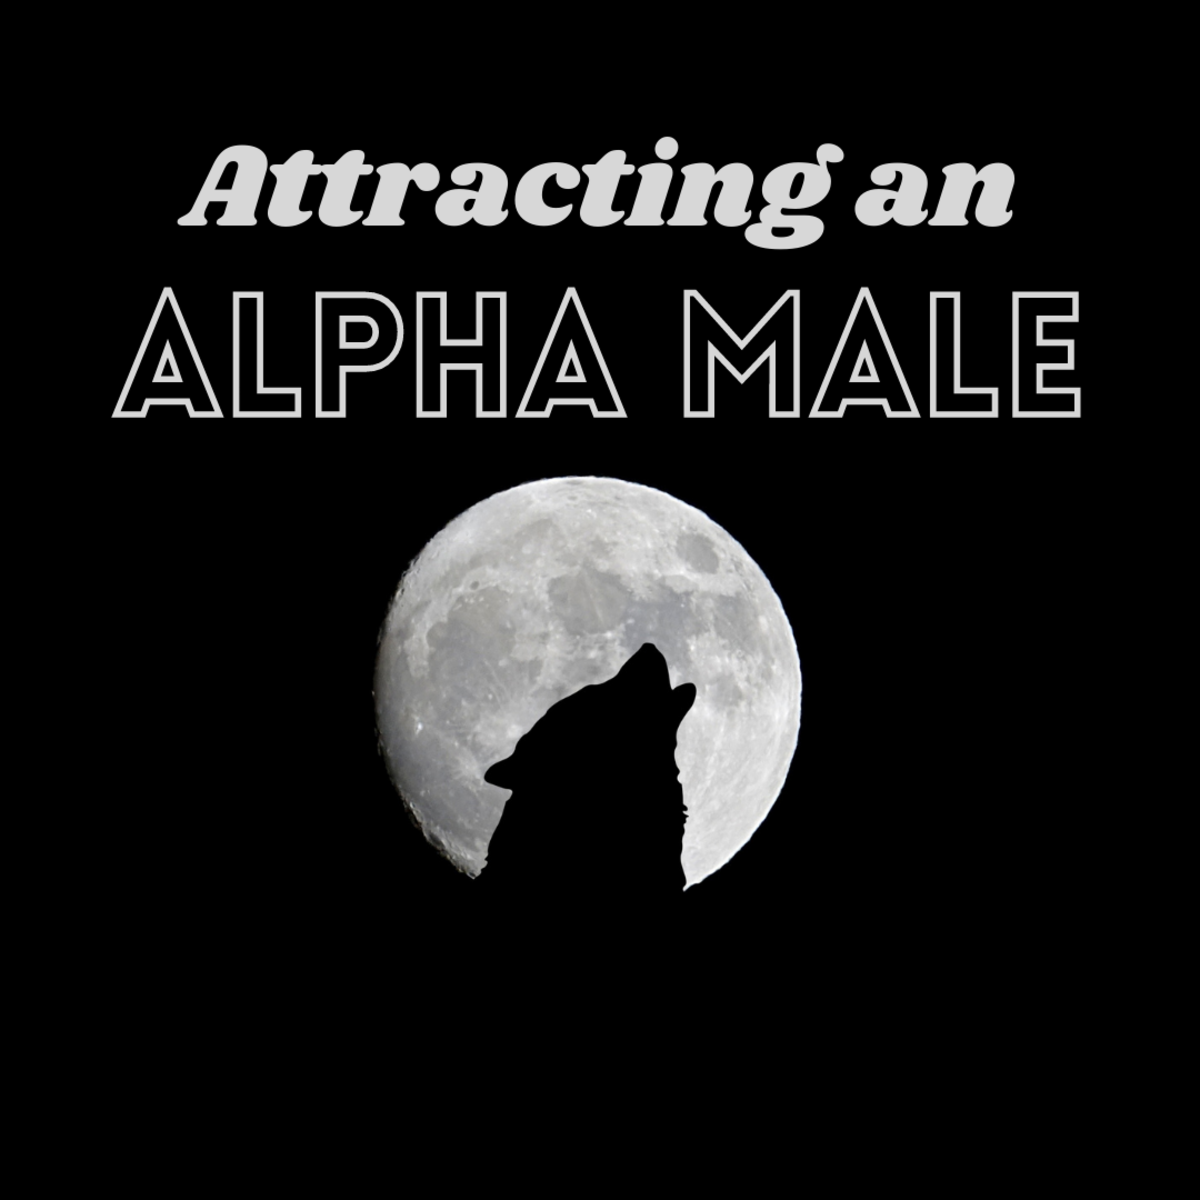 A guide to attracting an alpha male